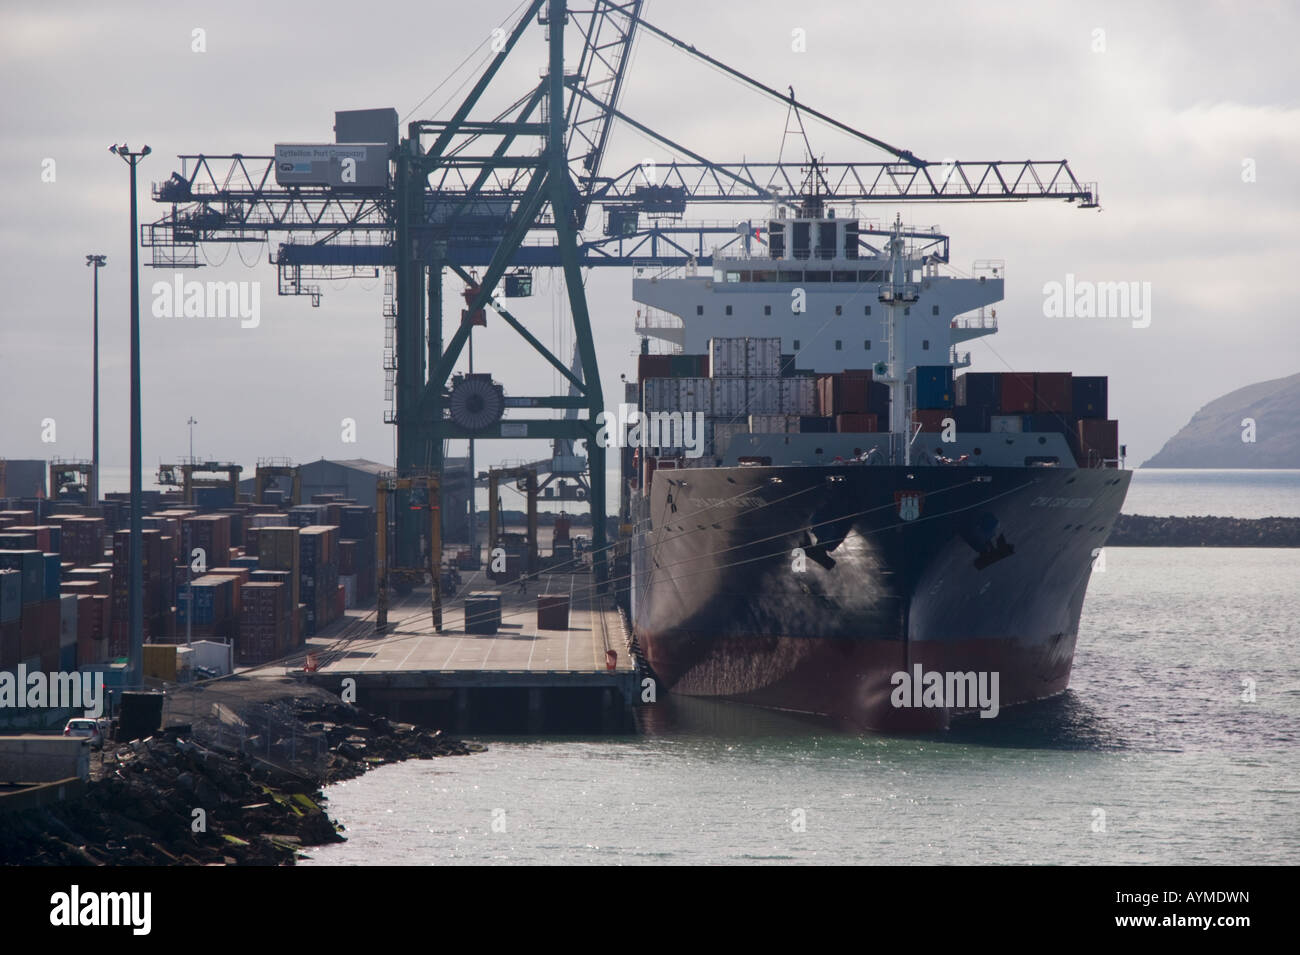 A container ship alongside the dock with shore cranes at work, Lyttelton, New Zealand Stock Photo